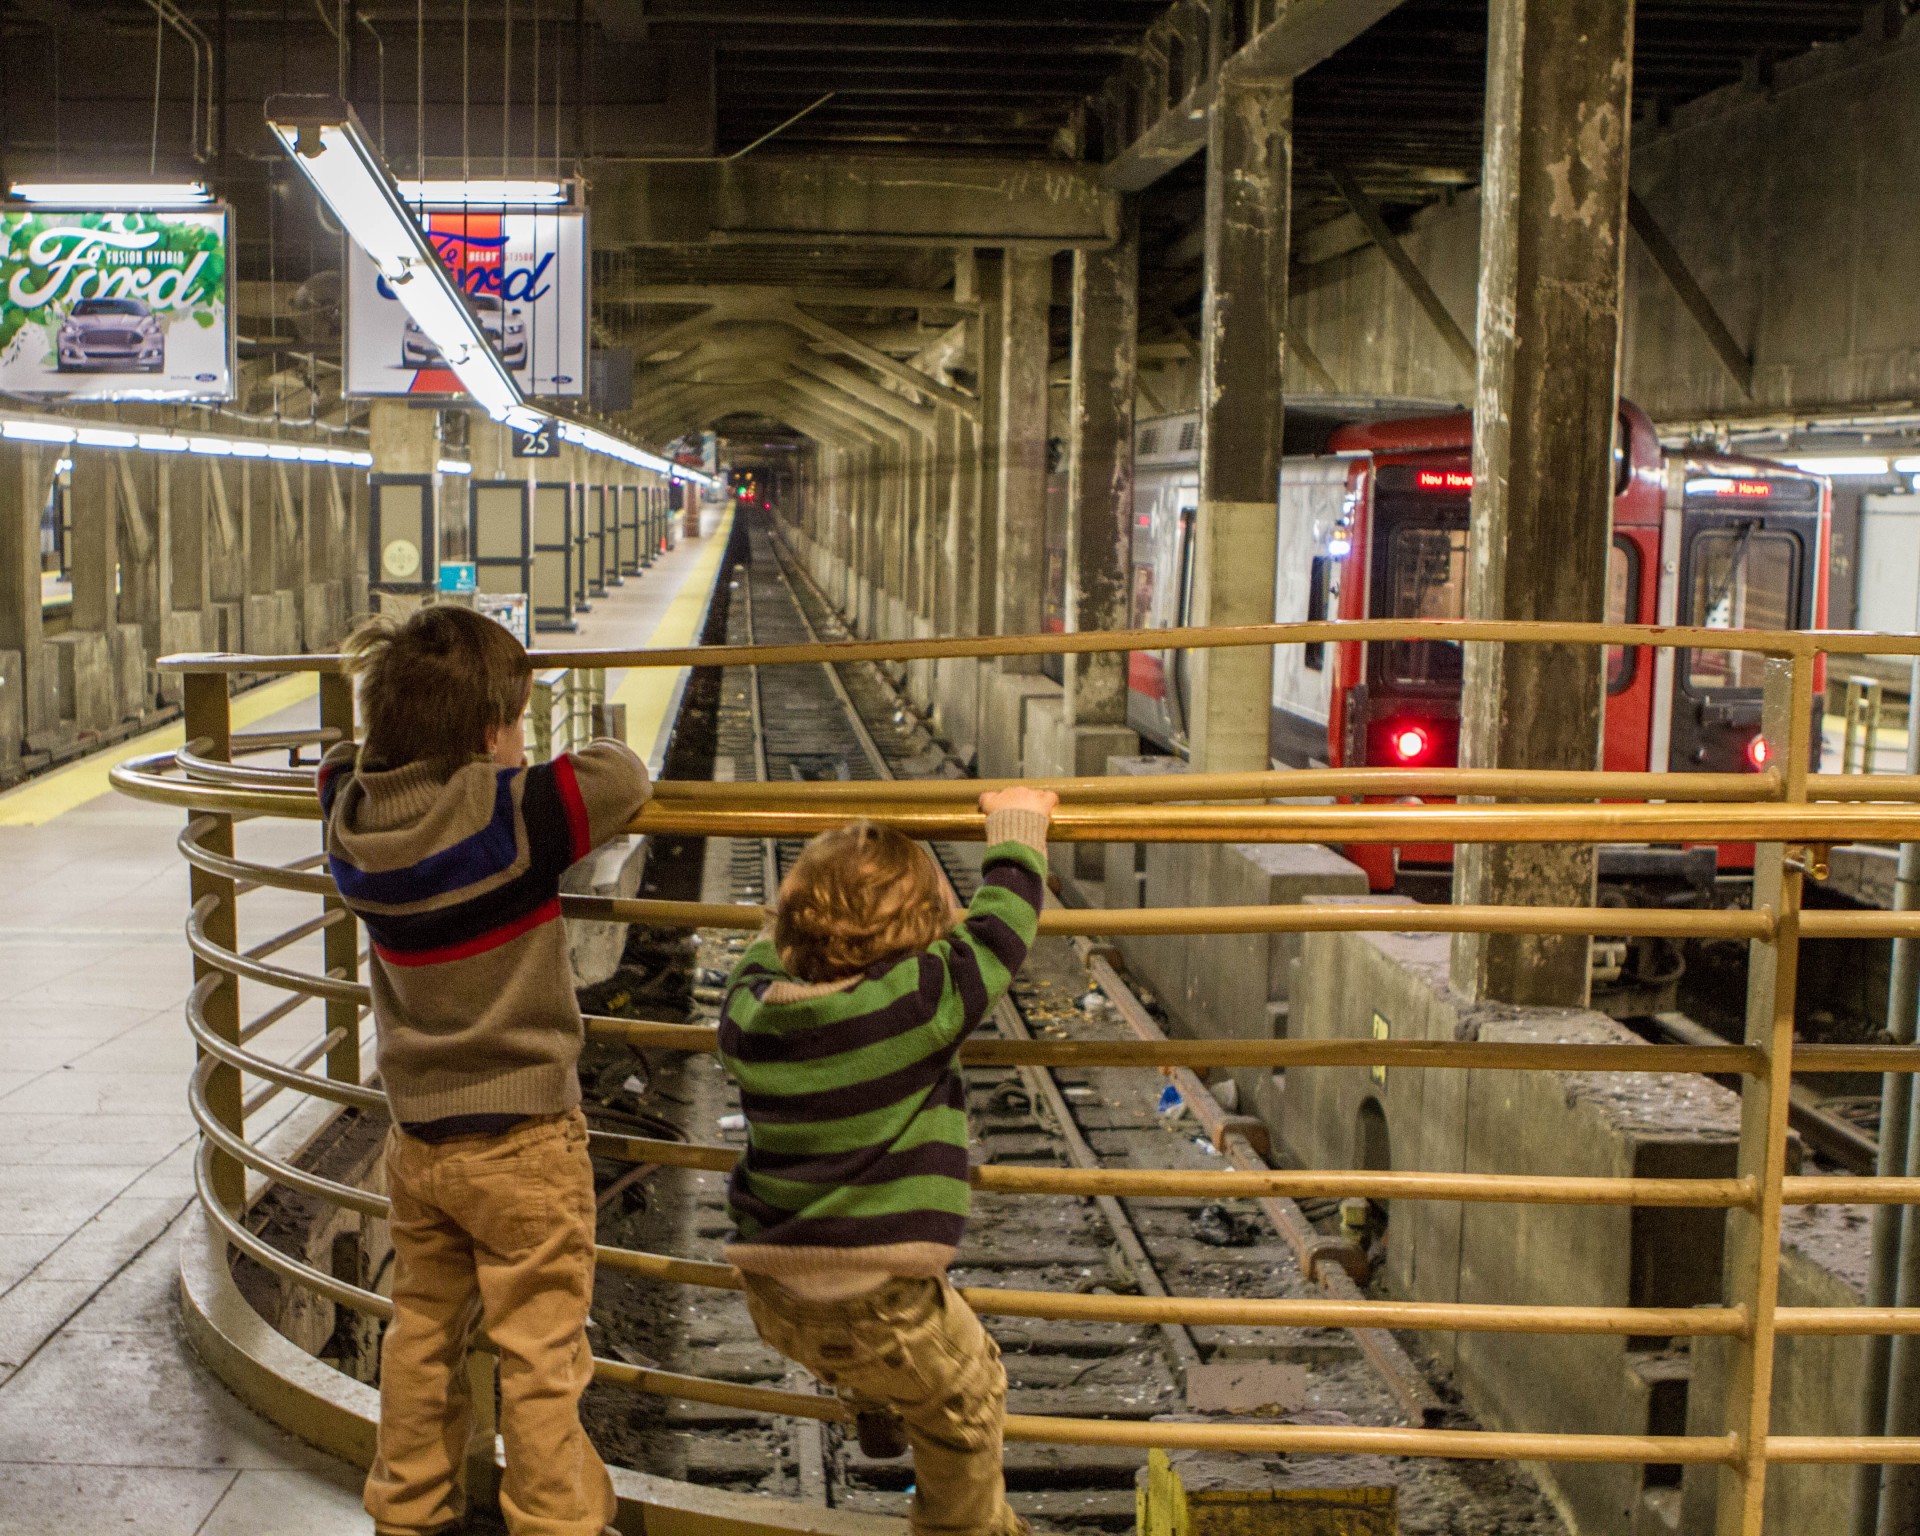 two young boys hang on to a gate while looking at a subway station tracks